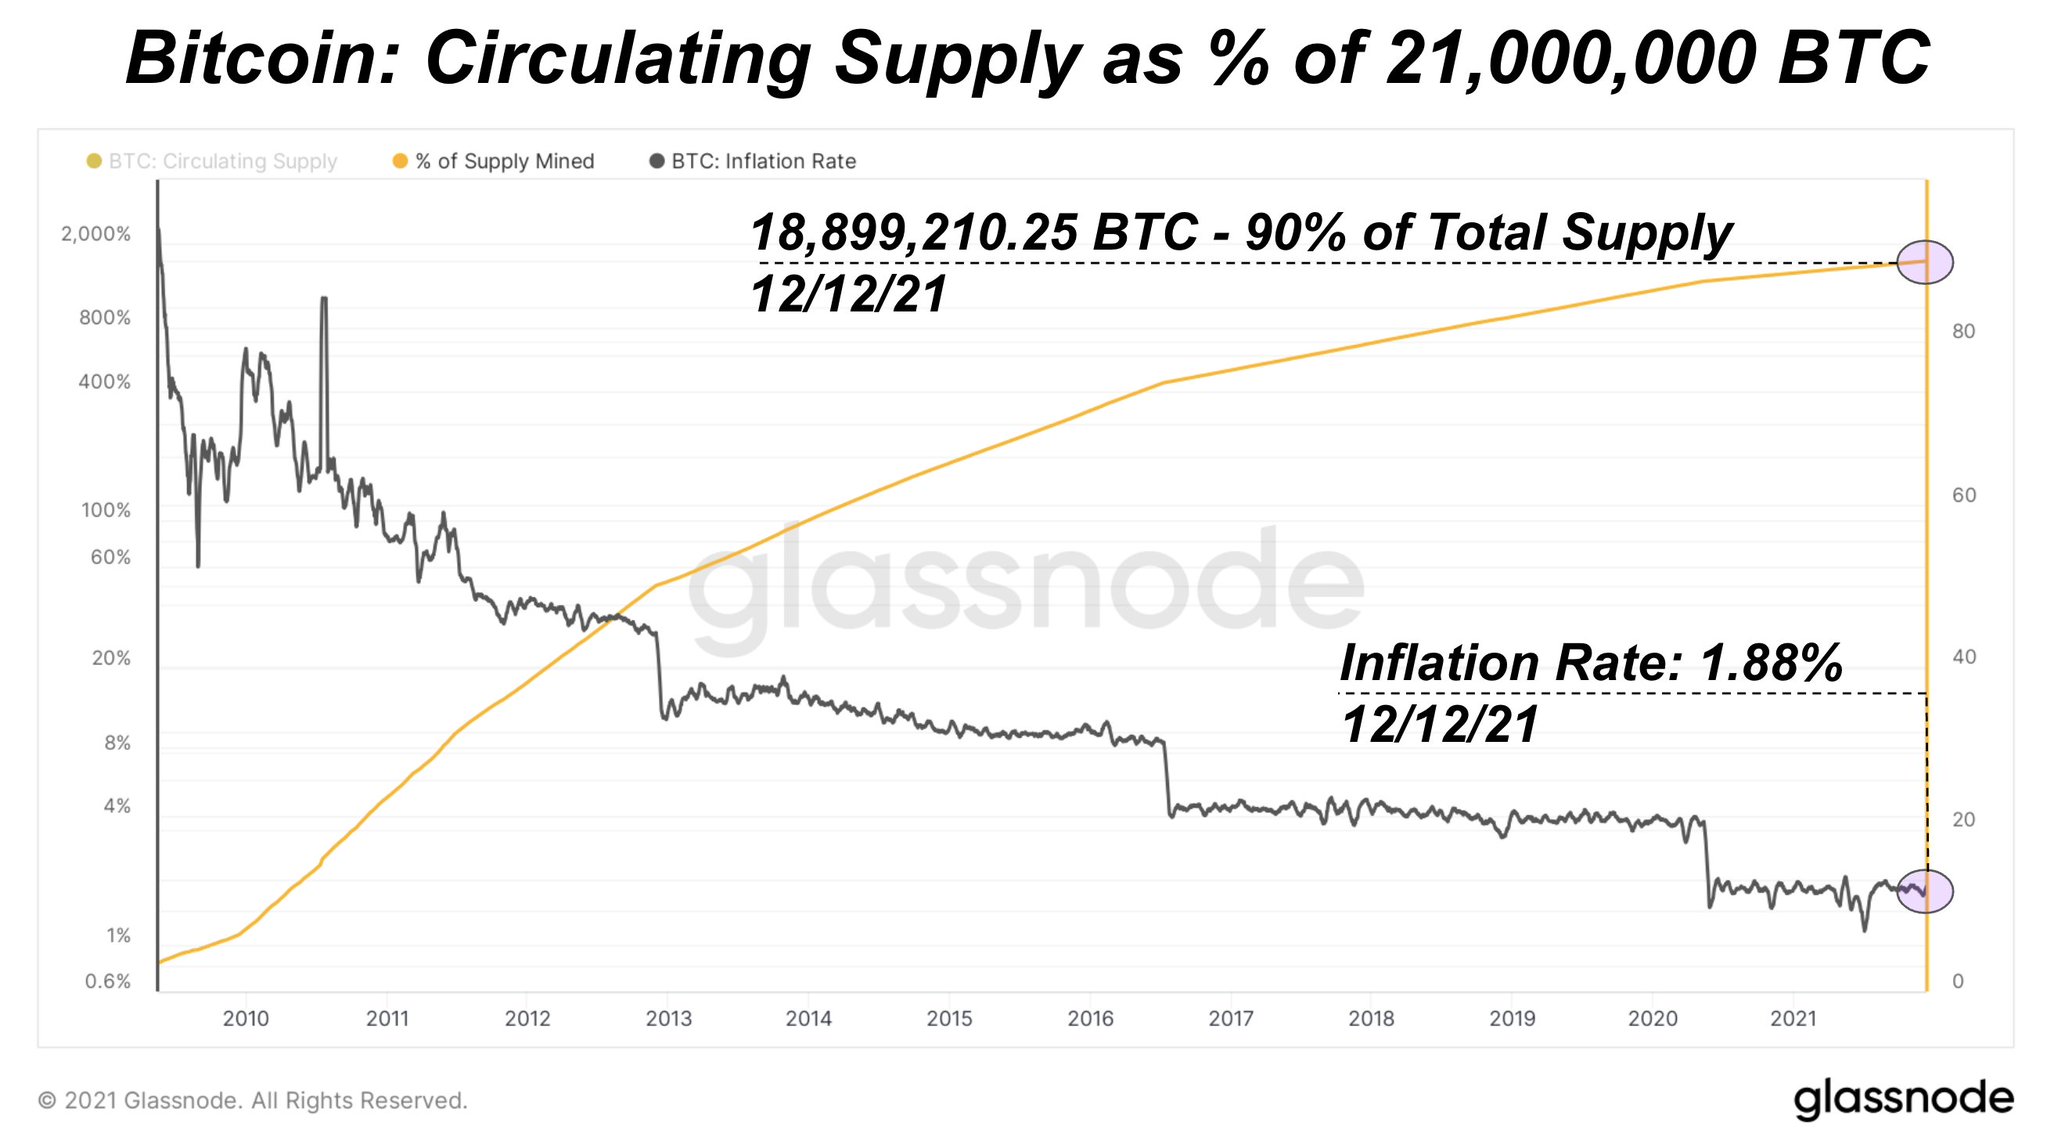 image 2021 12 13 090333 90% of Bitcoin’s Supply Cap Has Been Issued, Miners Have 119 Years Left to Mine BTC